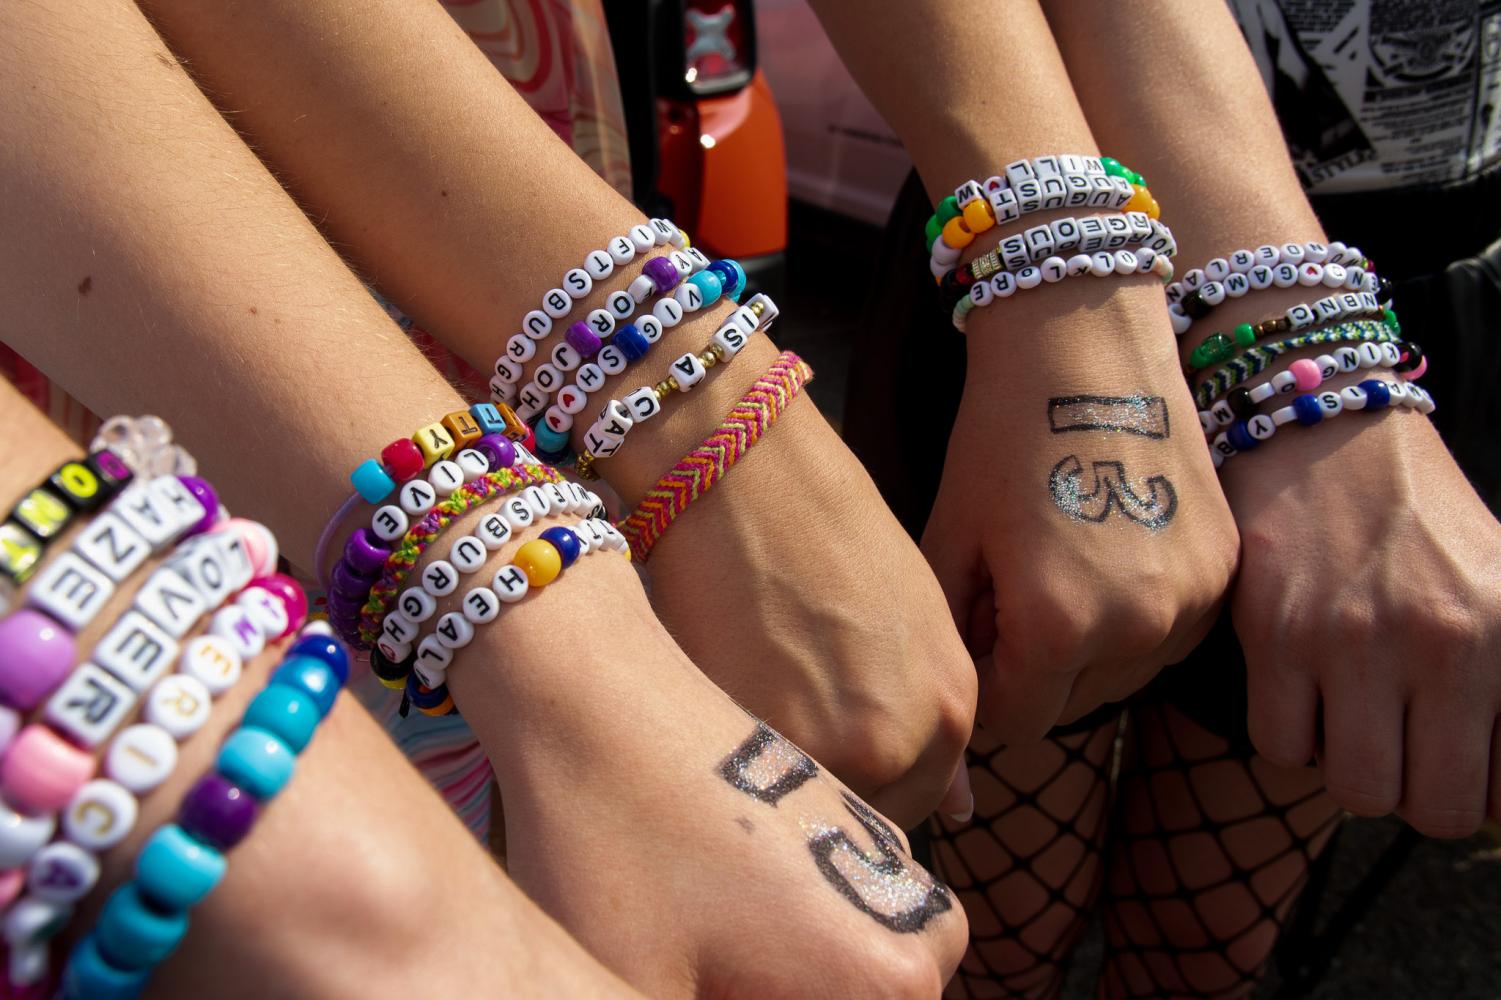 Taylor Swift, friendship bracelets, and closing the liking gap